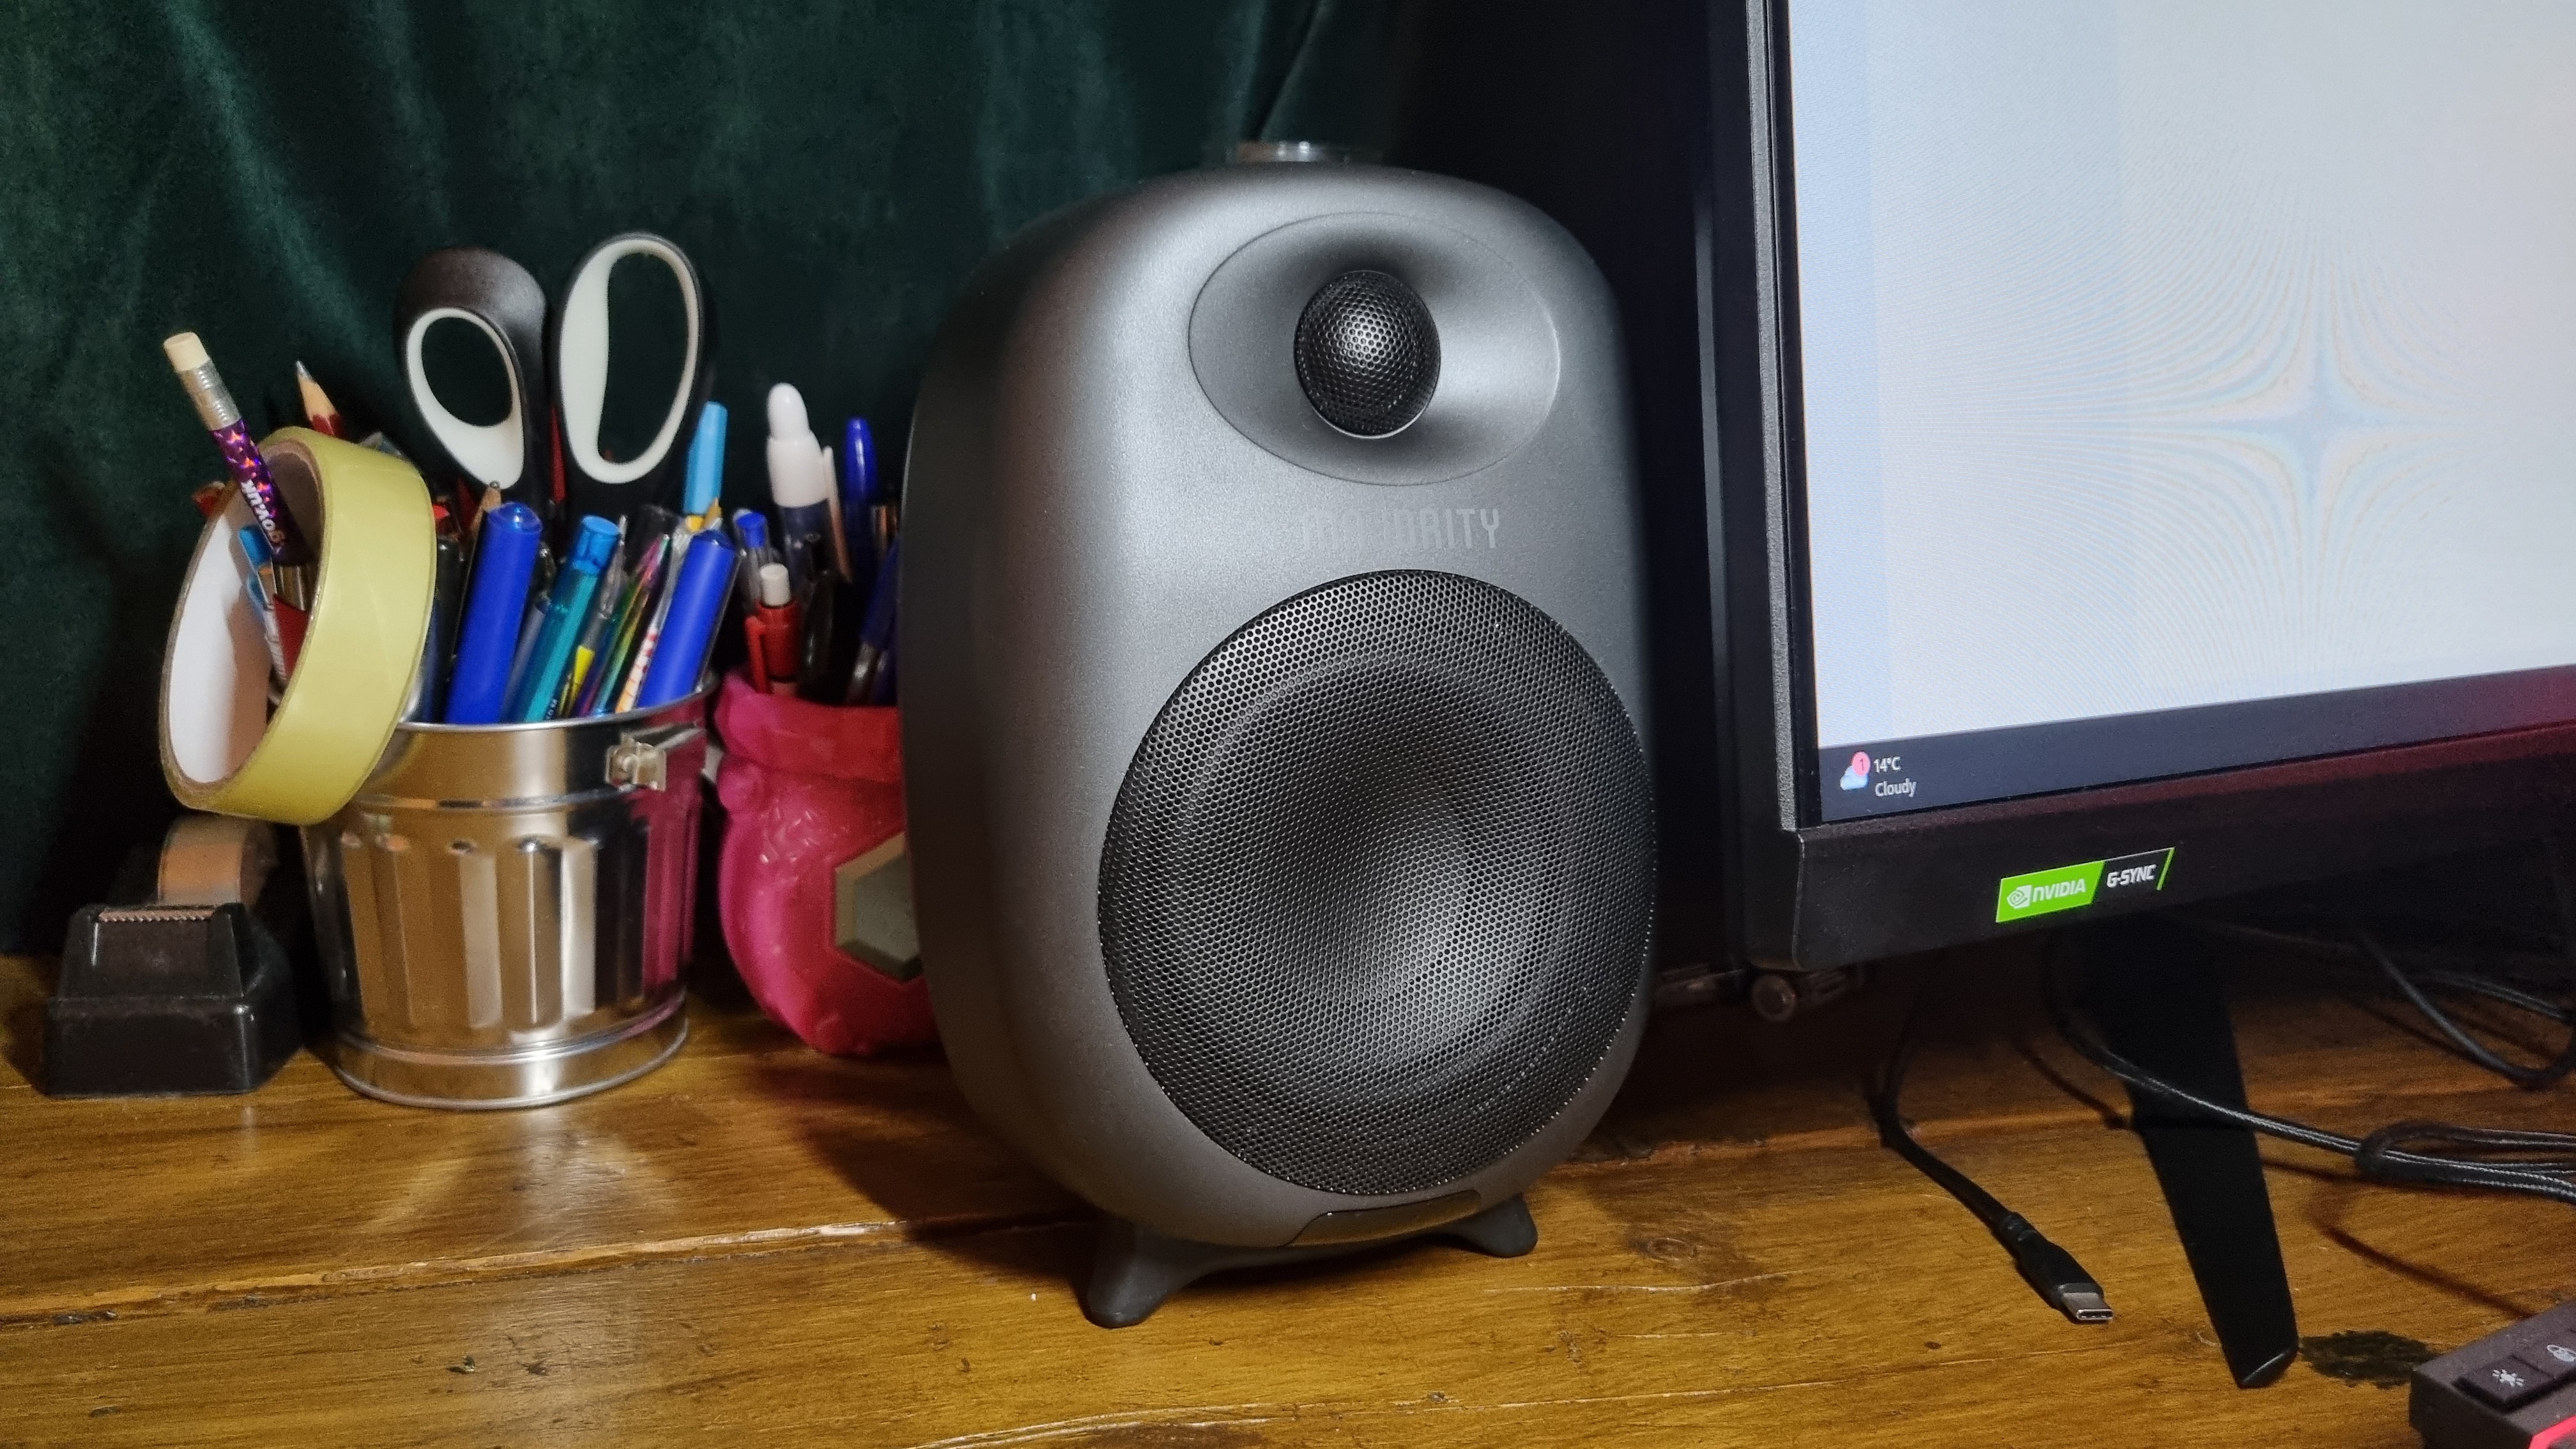 One of the Majority D80 speakers next to a 32-inch computer monitor, with pots of pens and scissors for scale